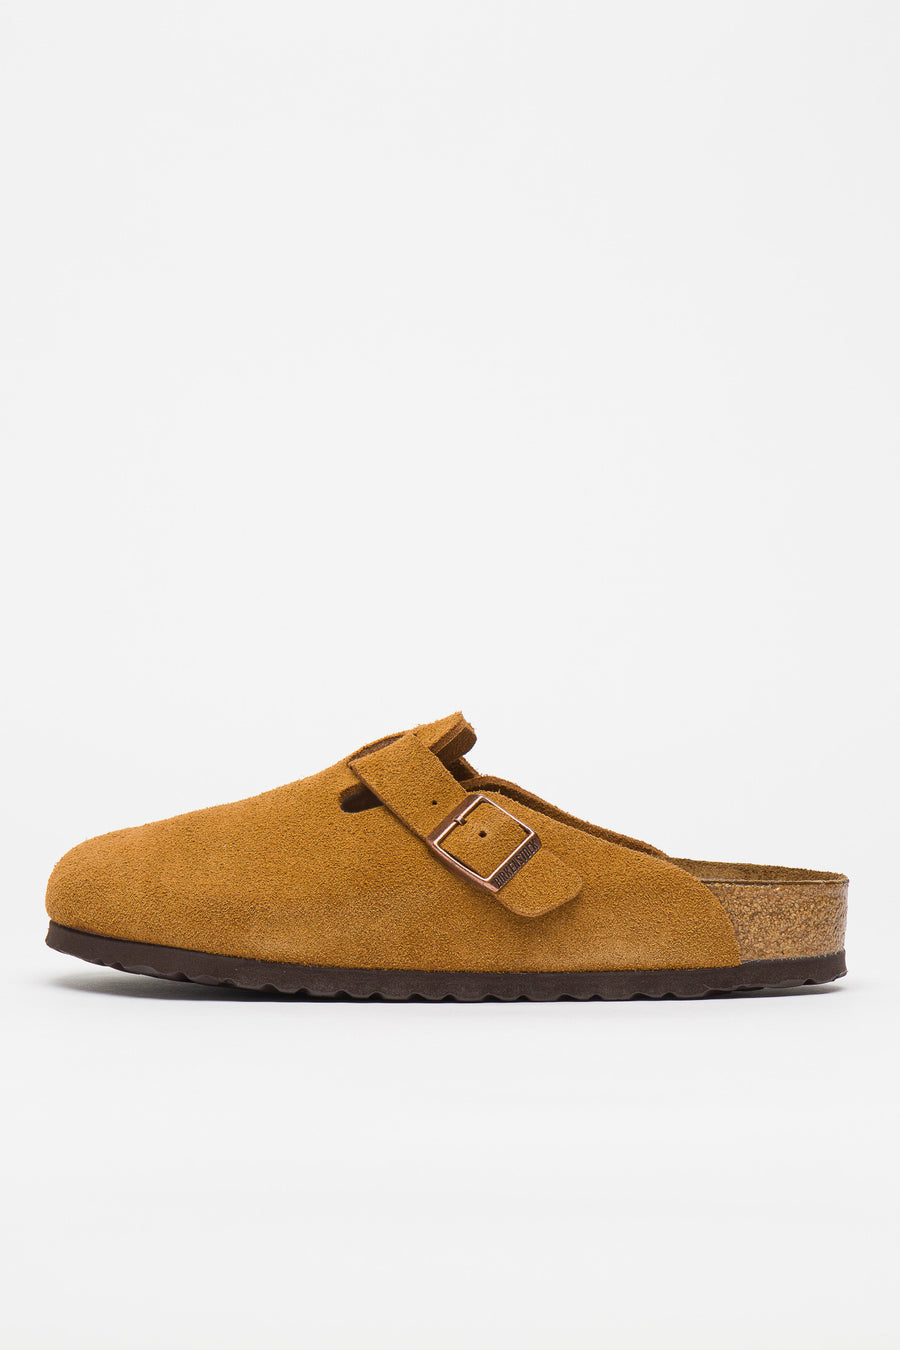 Boston Suede Soft Footbed in Mink